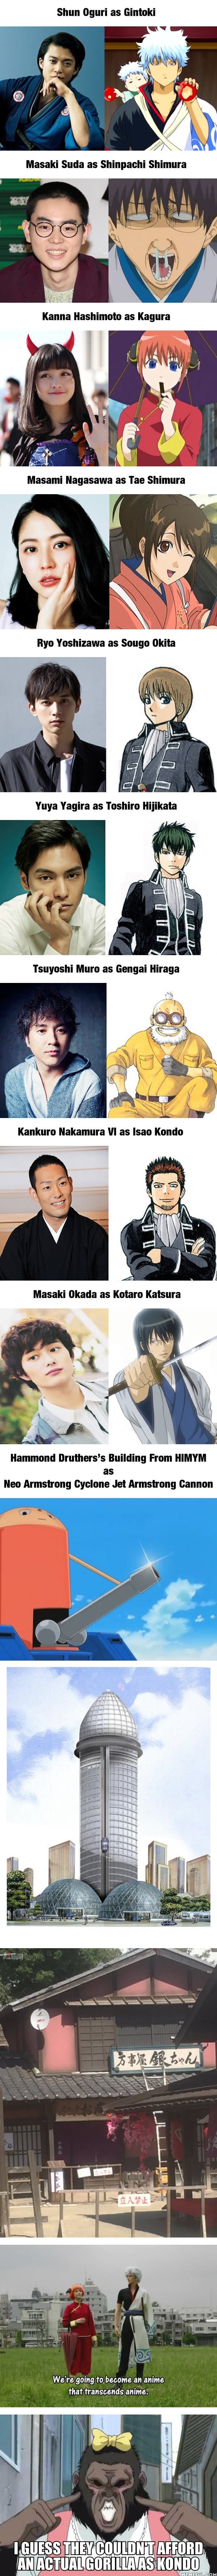 Gintama live-action cast confirmed